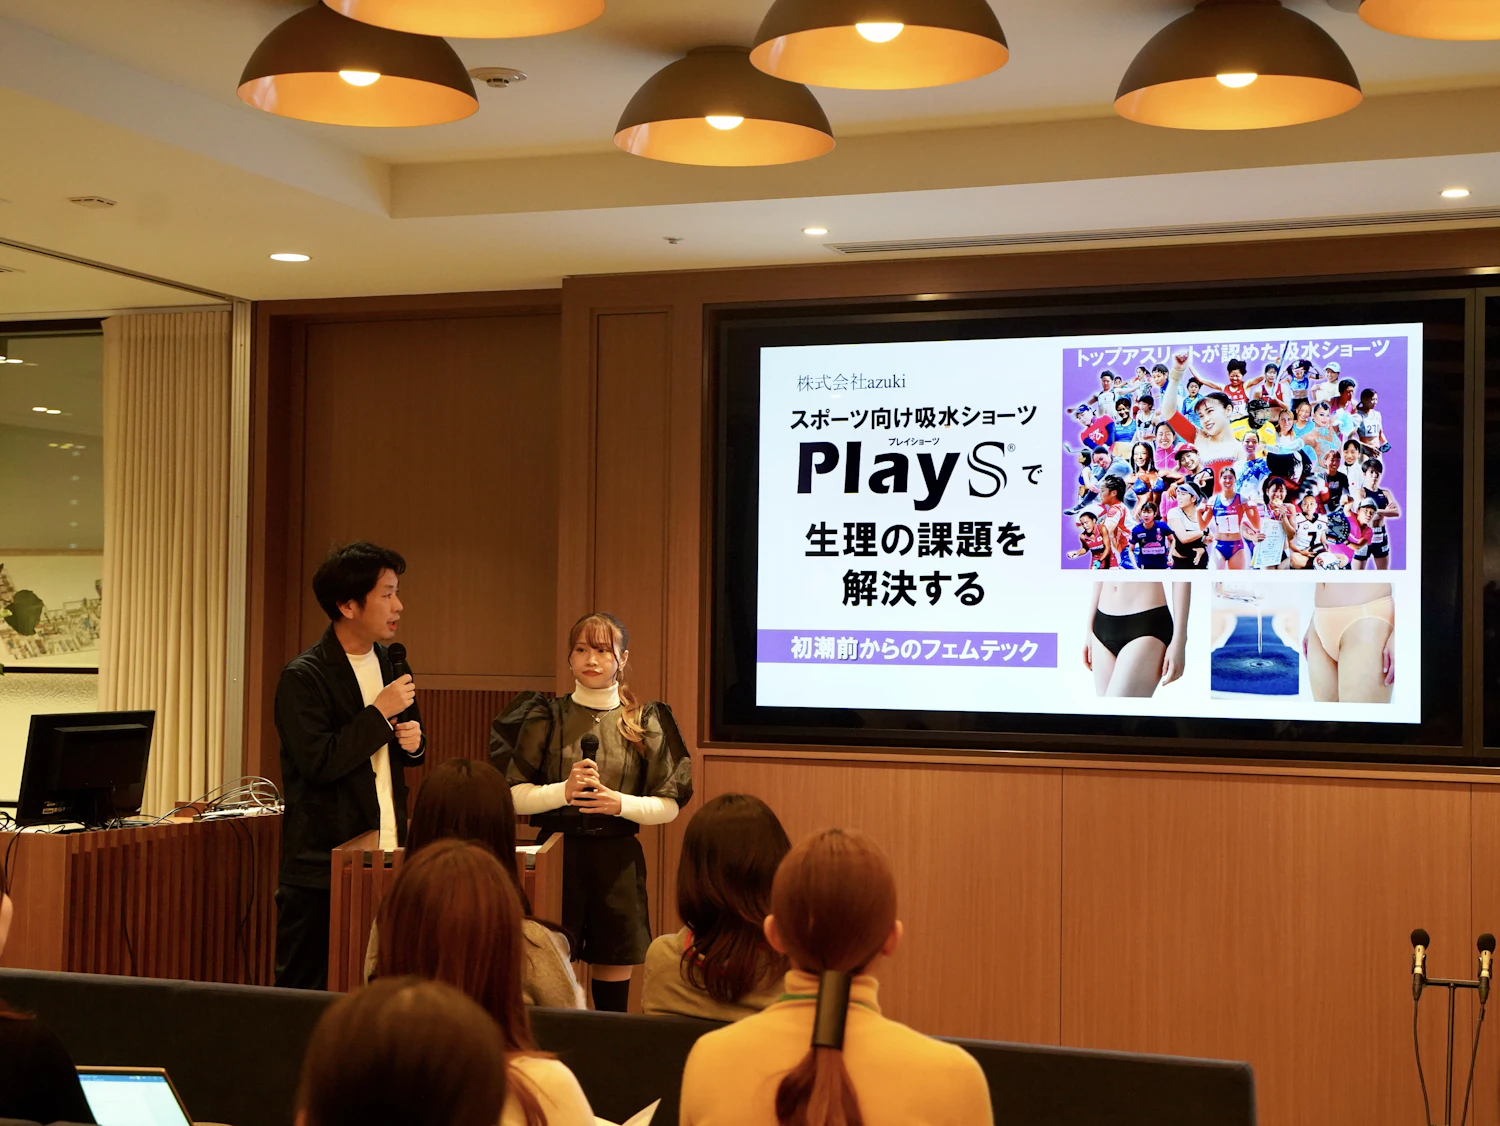 President Daisuke Sakagami of azuki, Co., Ltd. and Aiko Sugihara, who represented Japan as a gymnast at the 2016 Rio de Janeiro Olympics, took the stage. They discussed why they developed absorbent shorts and other topics